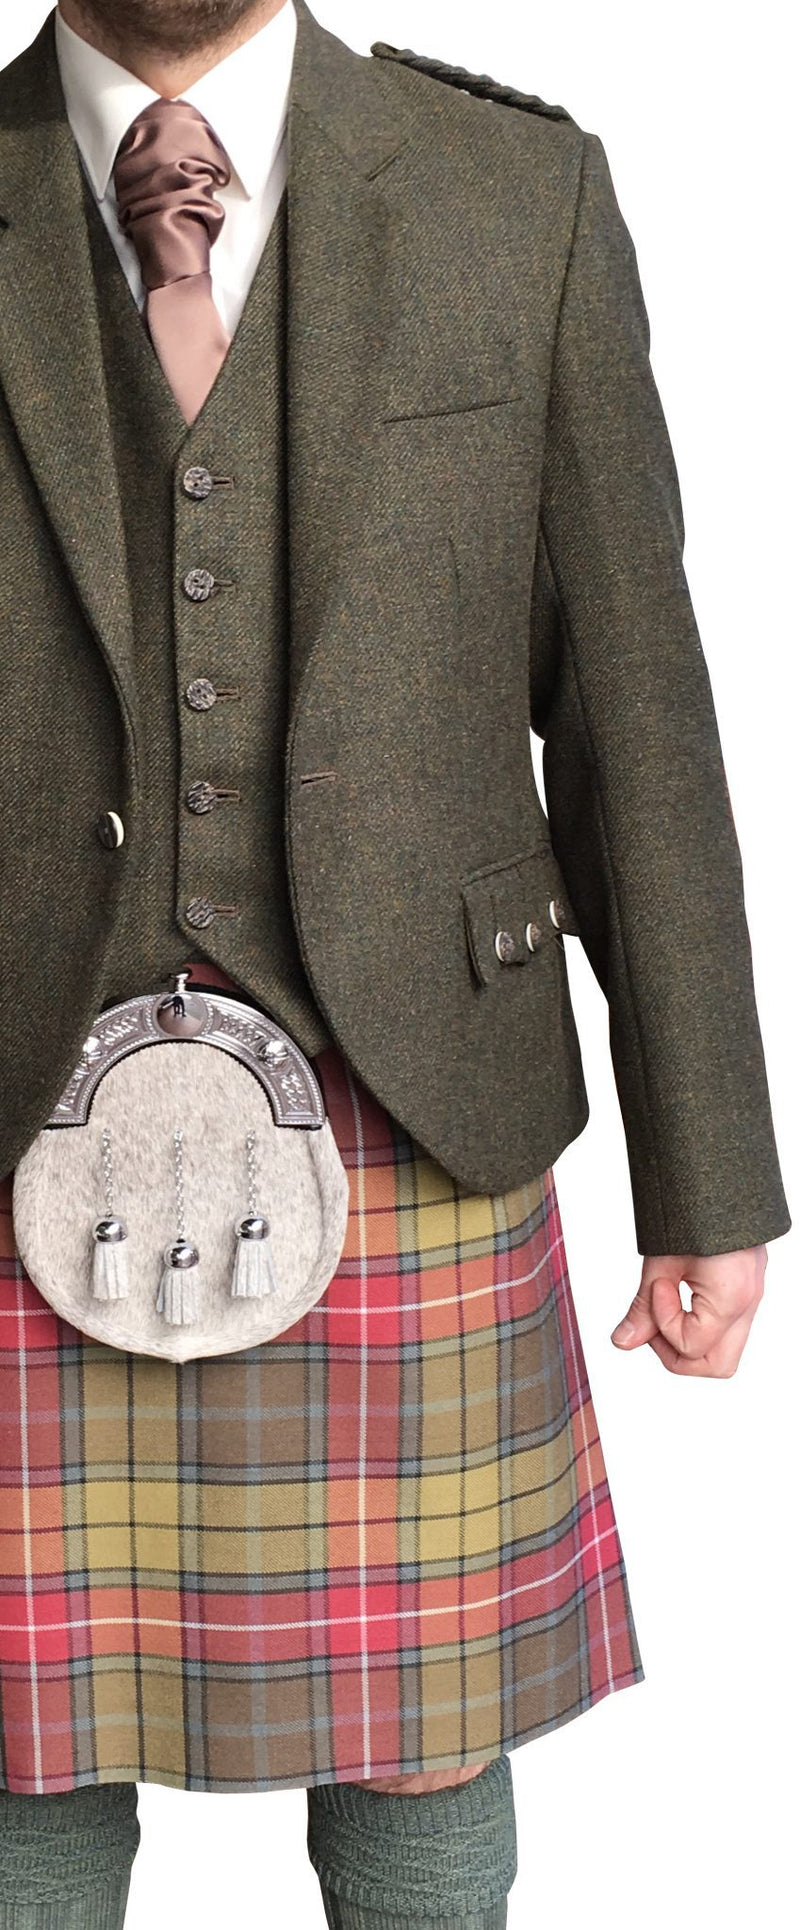 Deluxe Tweed Outfit - Anderson Kilts